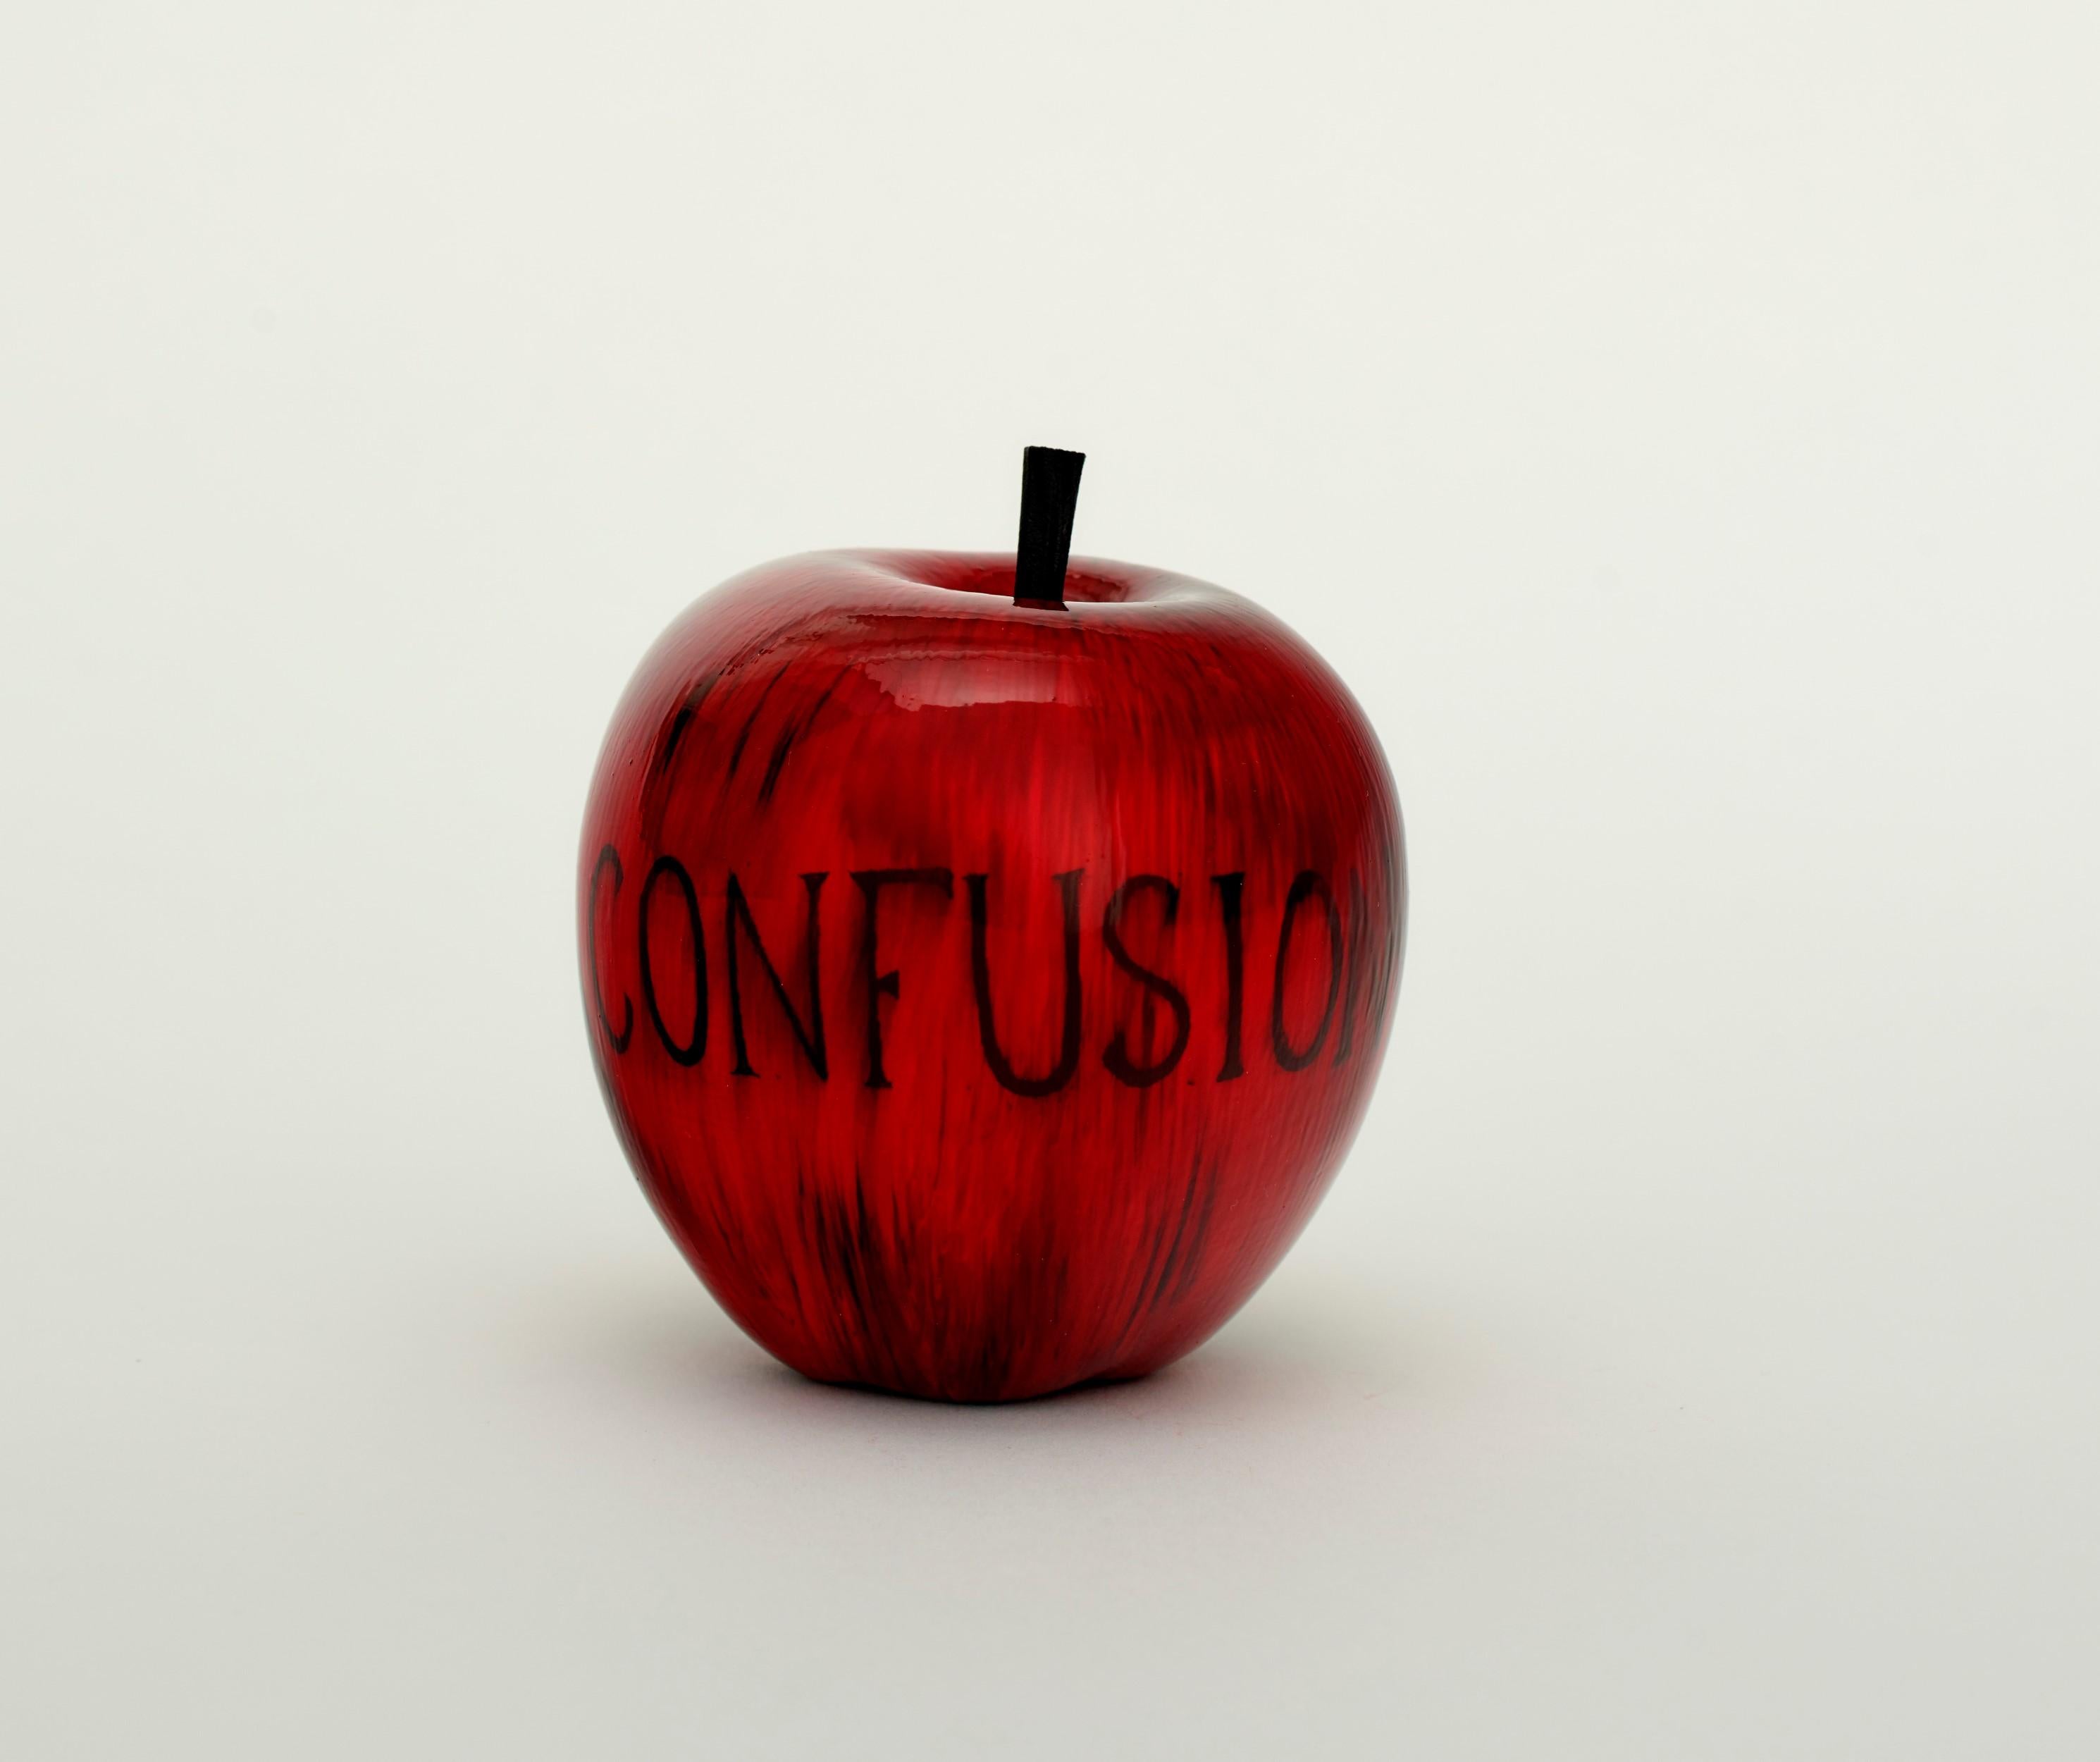 Barnaby Barford Figurative Sculpture - Confusion (Apple)